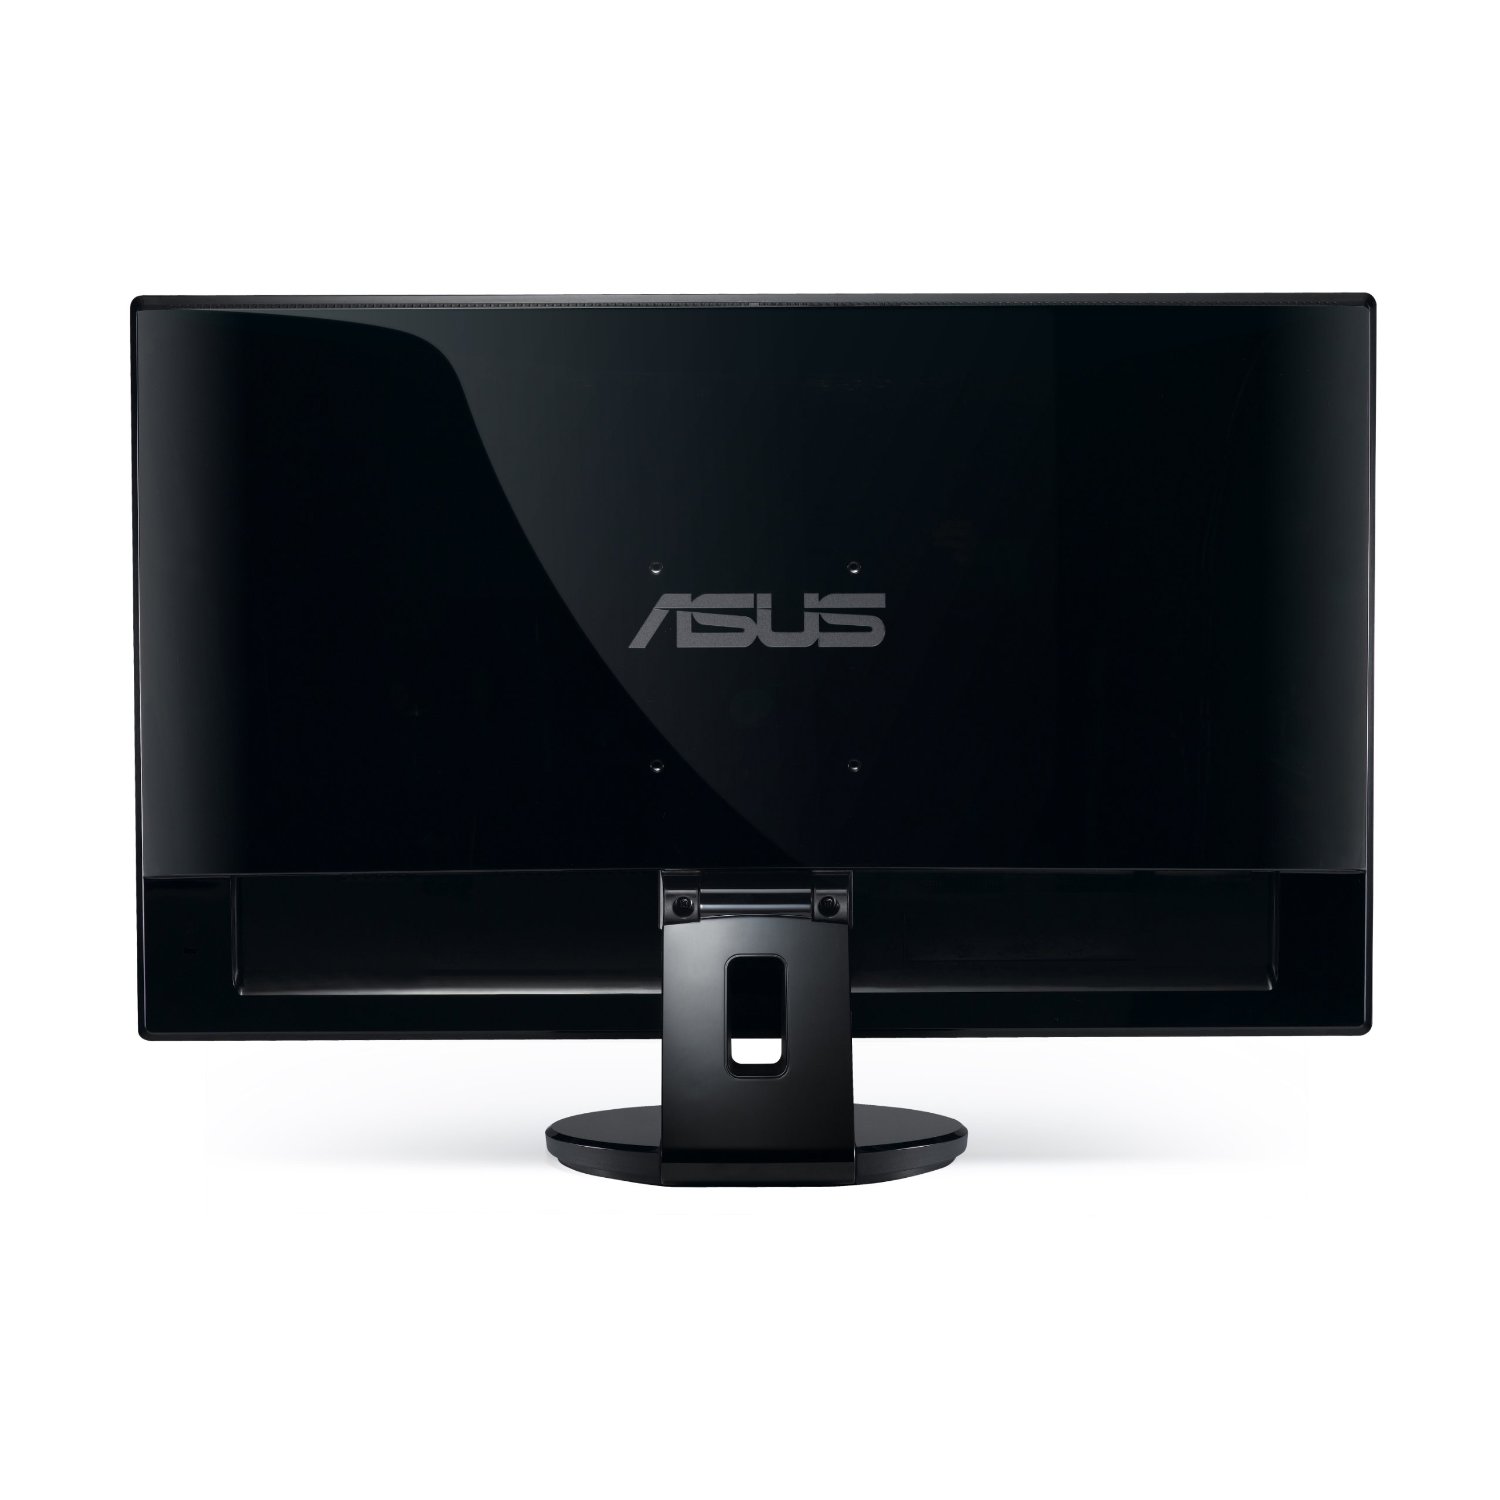 http://thetechjournal.com/wp-content/uploads/images/1110/1319692762-asus-ve276q-27inch-wide-2ms-response-time-display-port-lcd-monitor-6.jpg